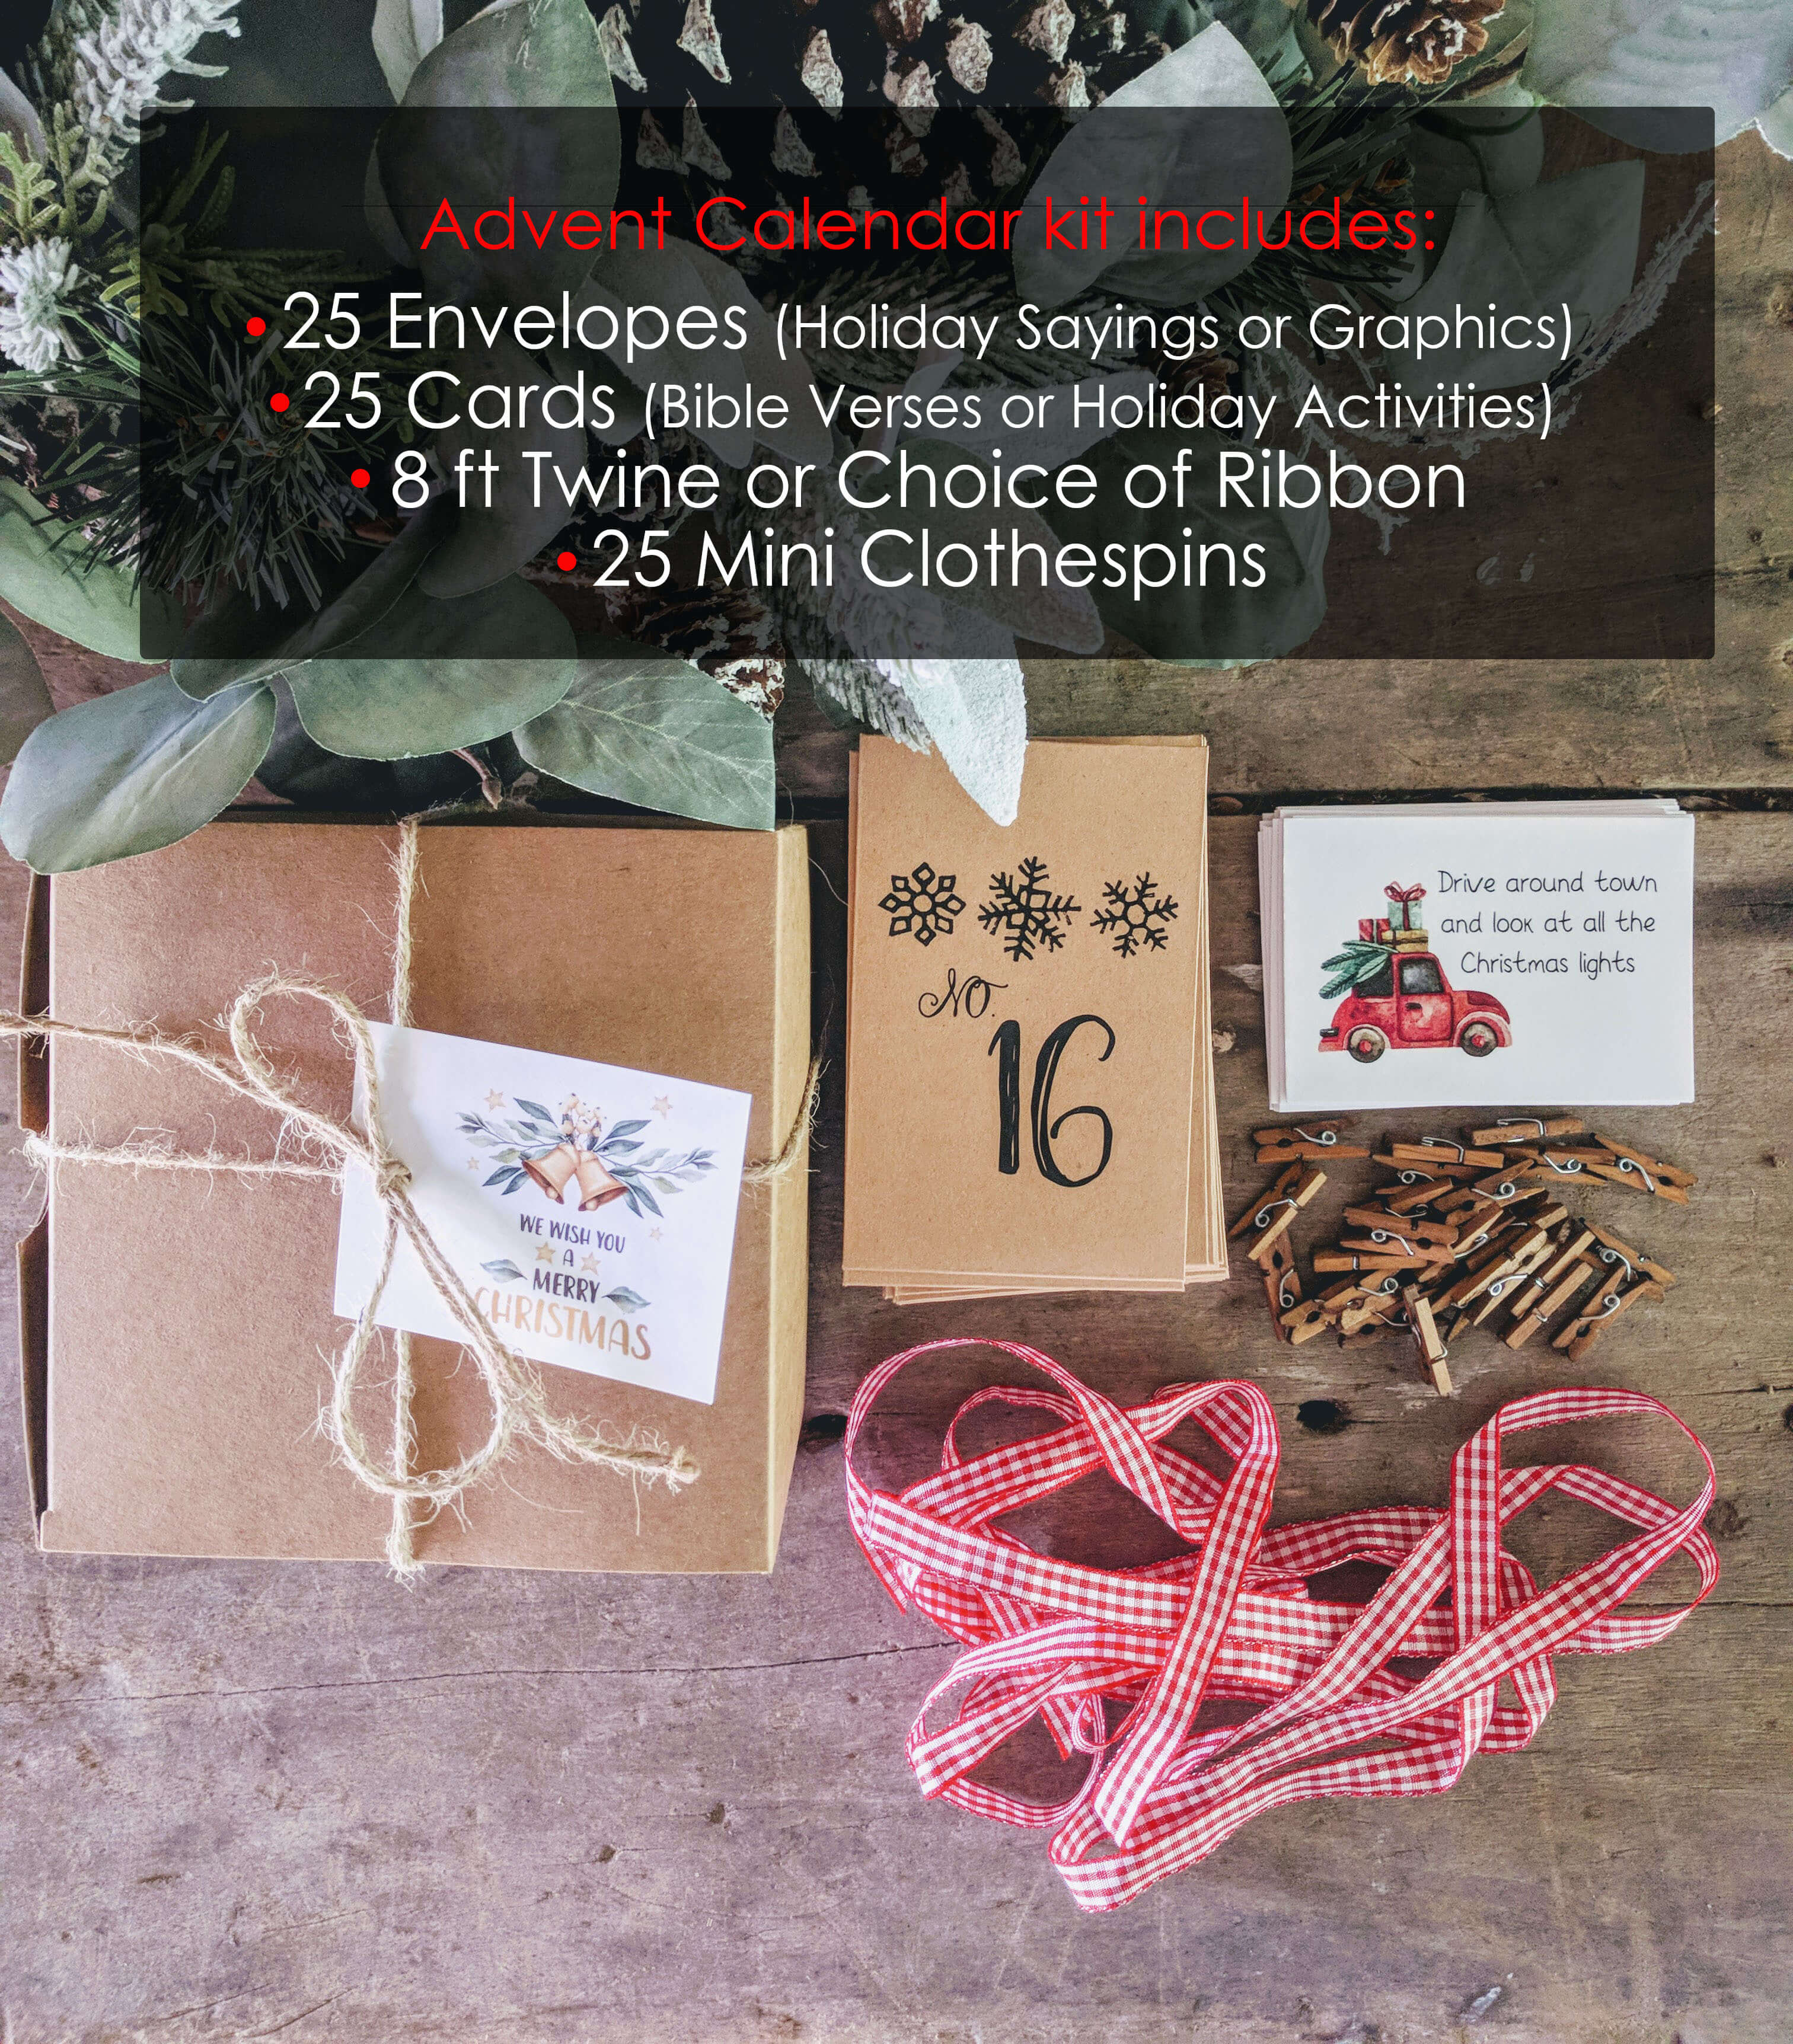 Advent Calendar Kit includes Envelopes, Cards, Ribbon and Clothespins